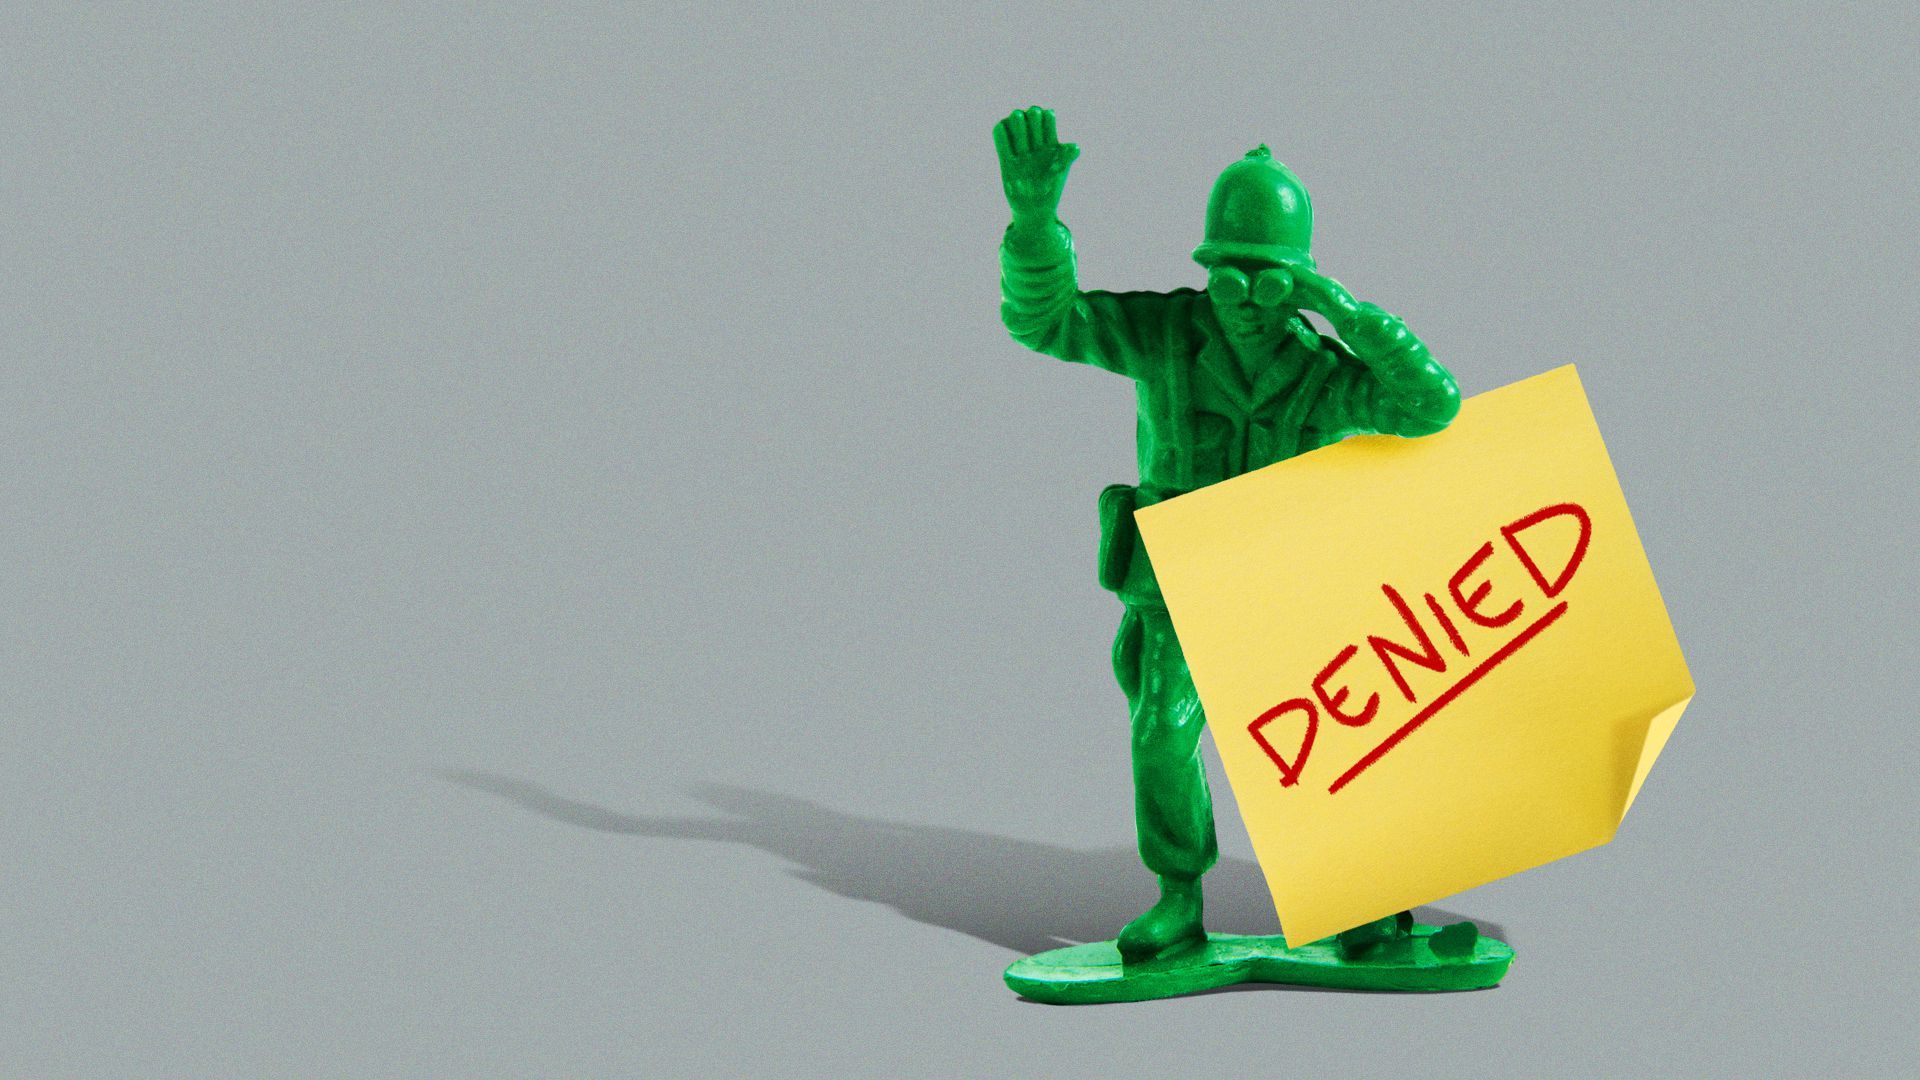 Illustration of a post-it note that says "DENIED" stuck to a green toy soldier. 